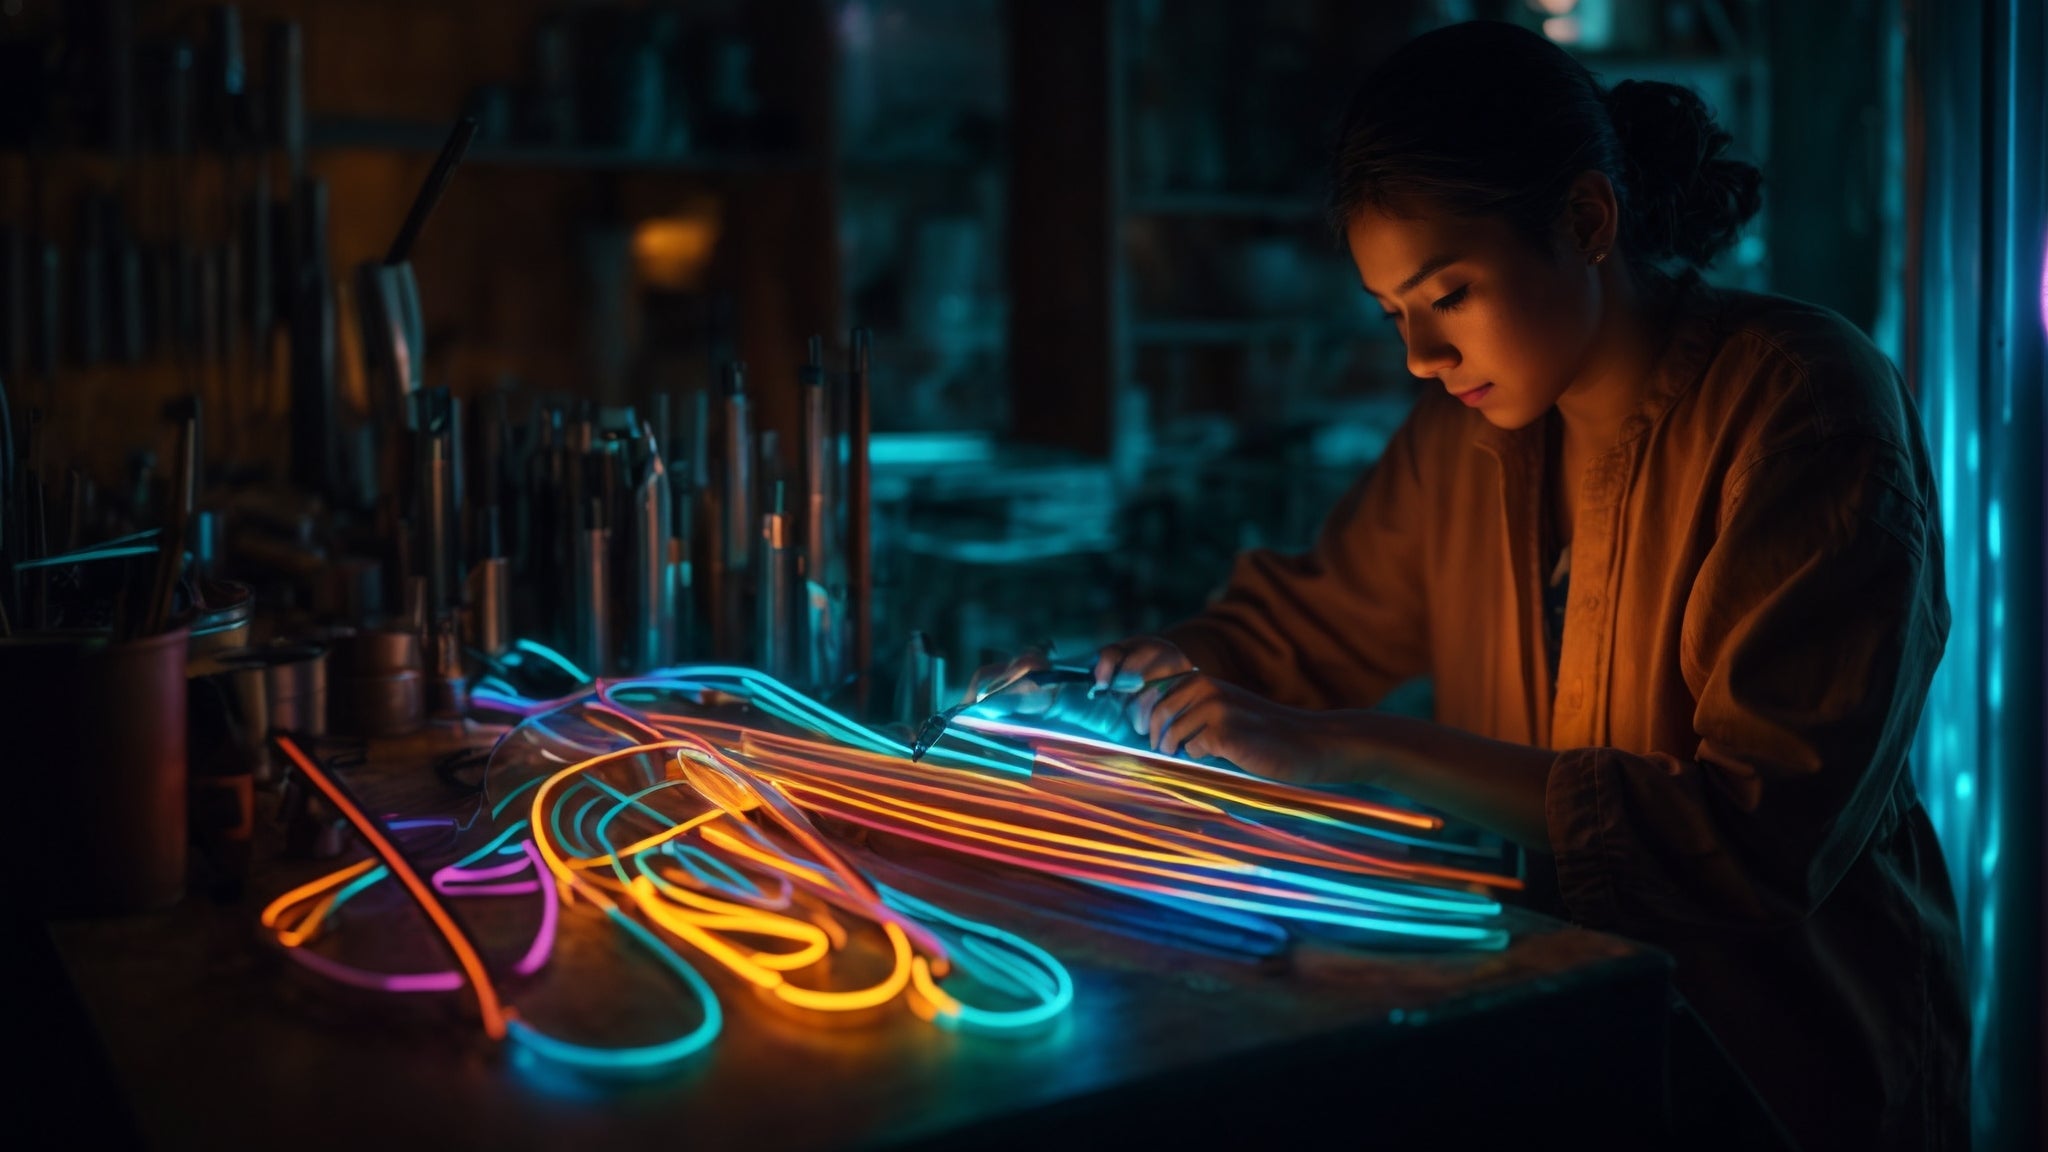 From Gas to Glory: The Science Behind Neon Gas and Its Use in Illumination